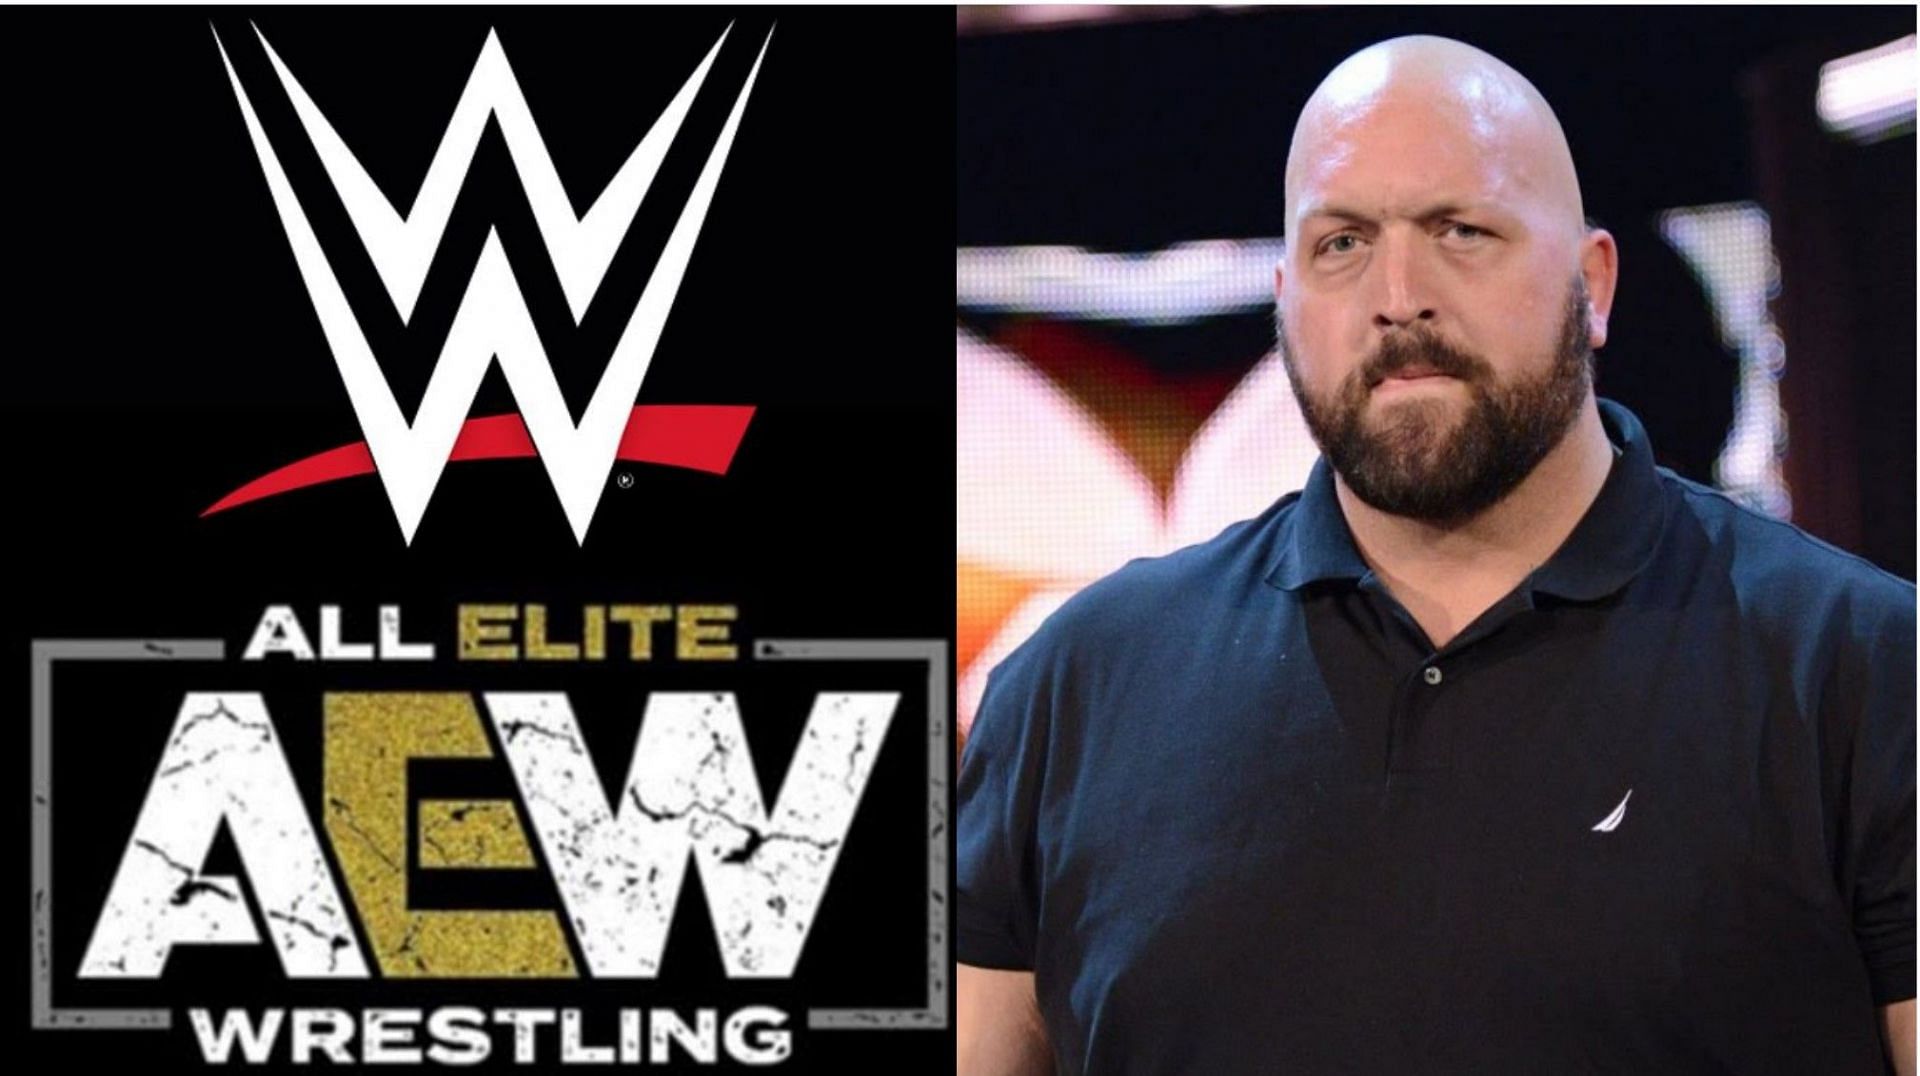 The former Big Show is a multi-time WWE World Champion!